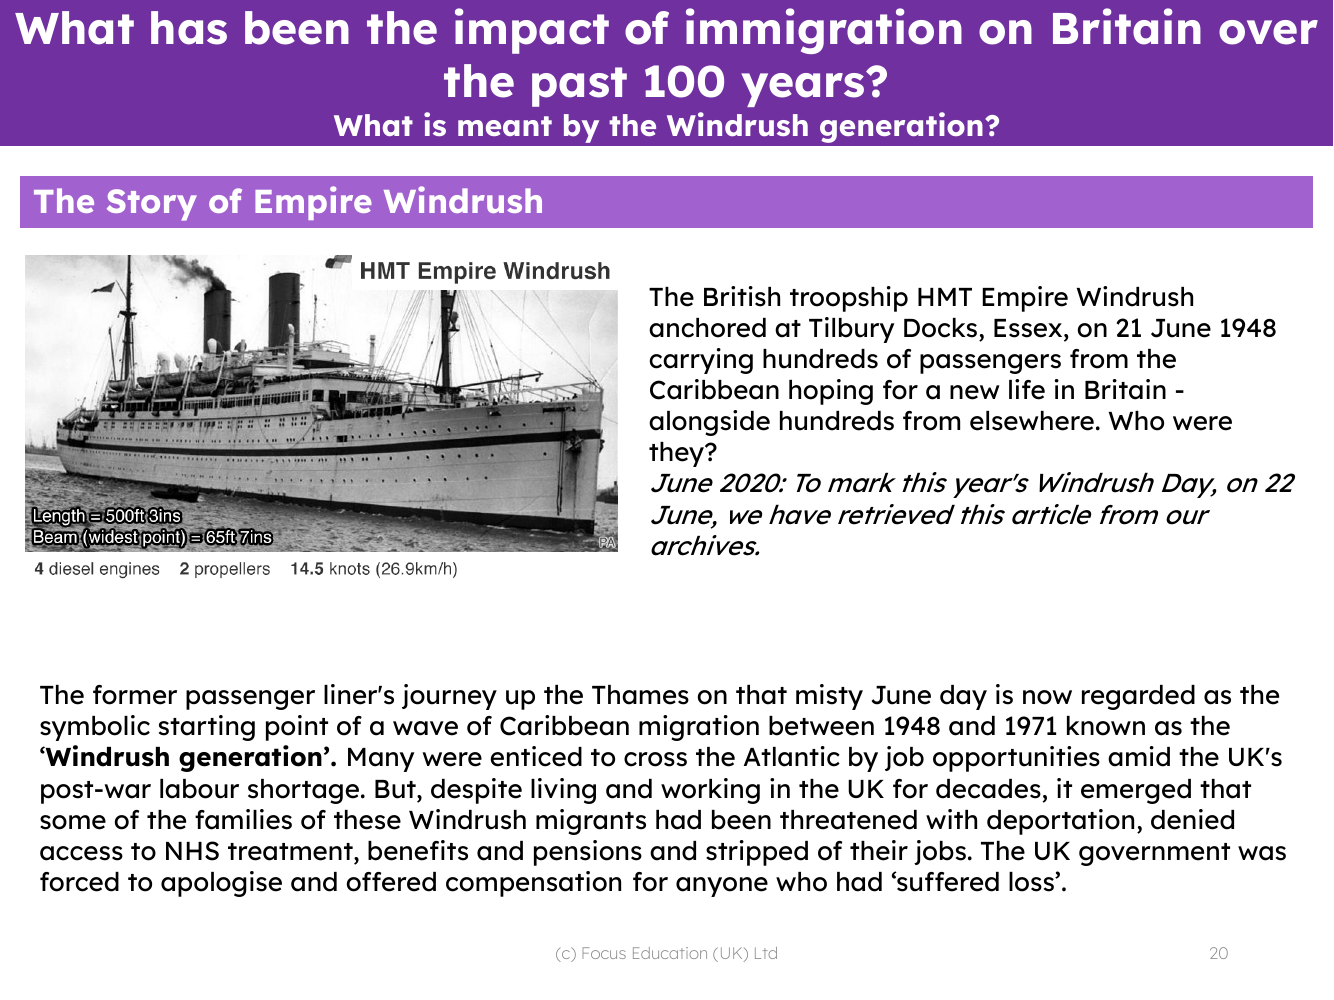 The story of Empire Windrush - Info pack